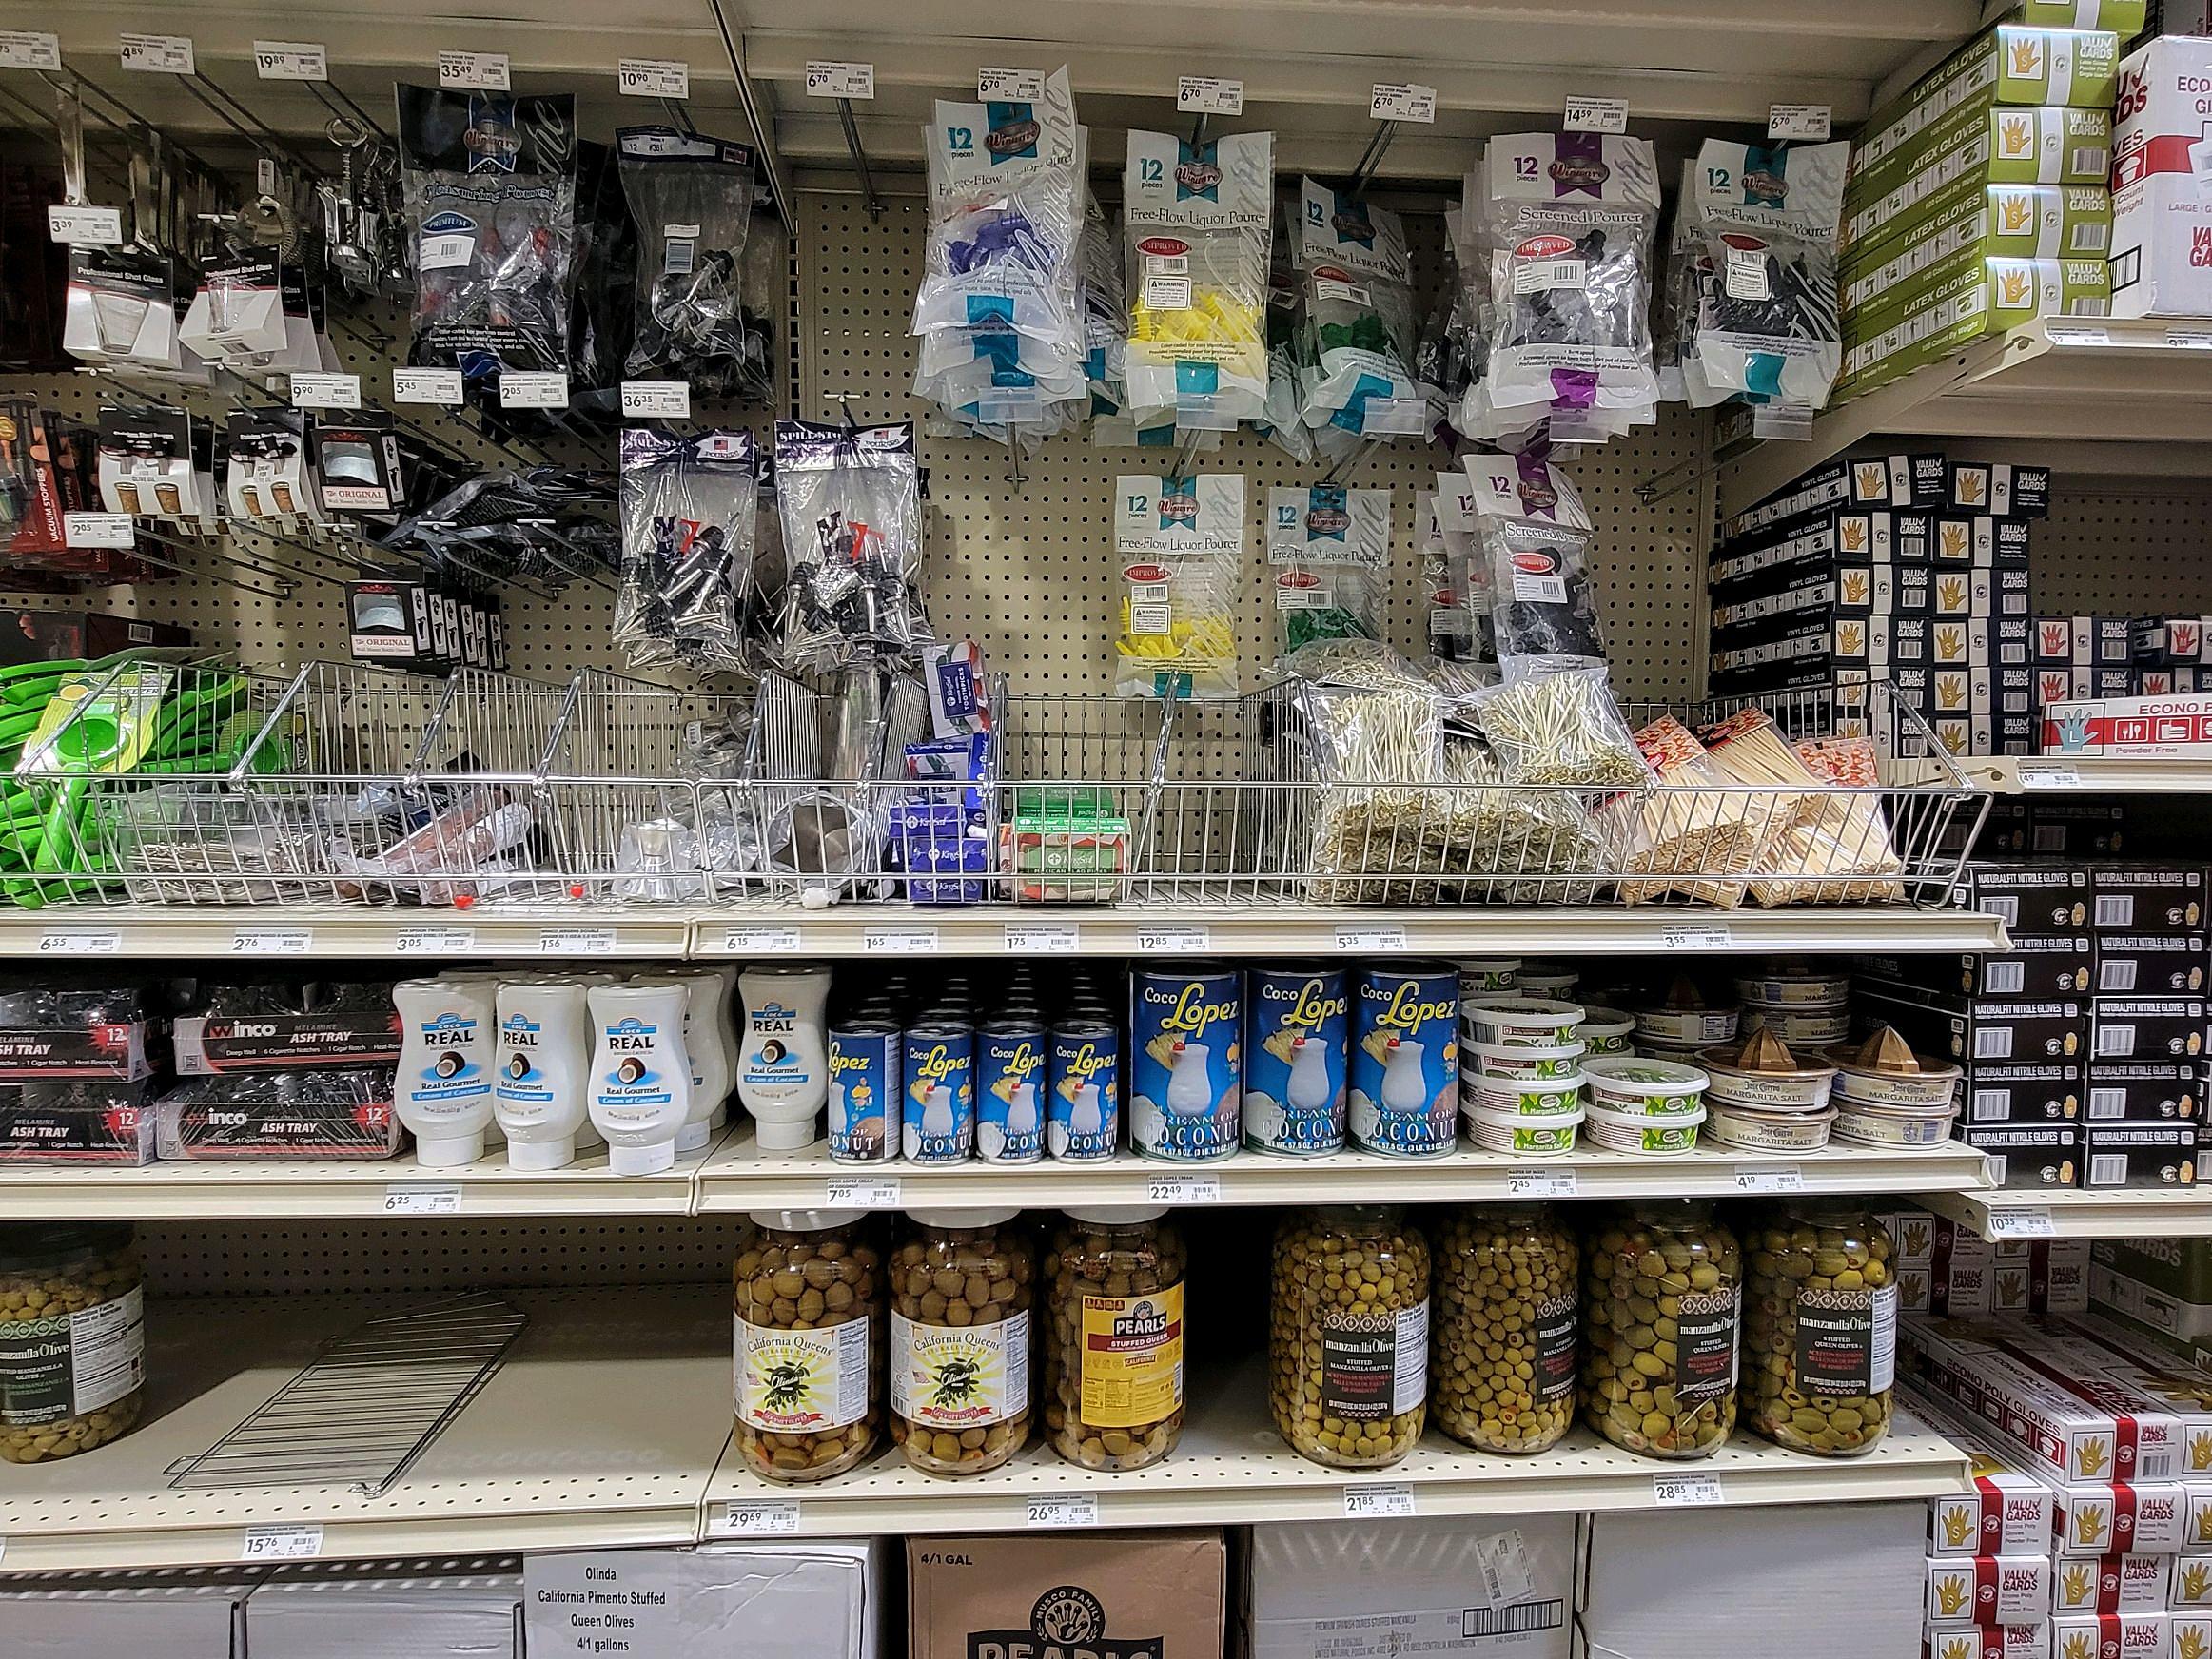 A Look Inside the NEW US Foods Chef Store in St George, Utah